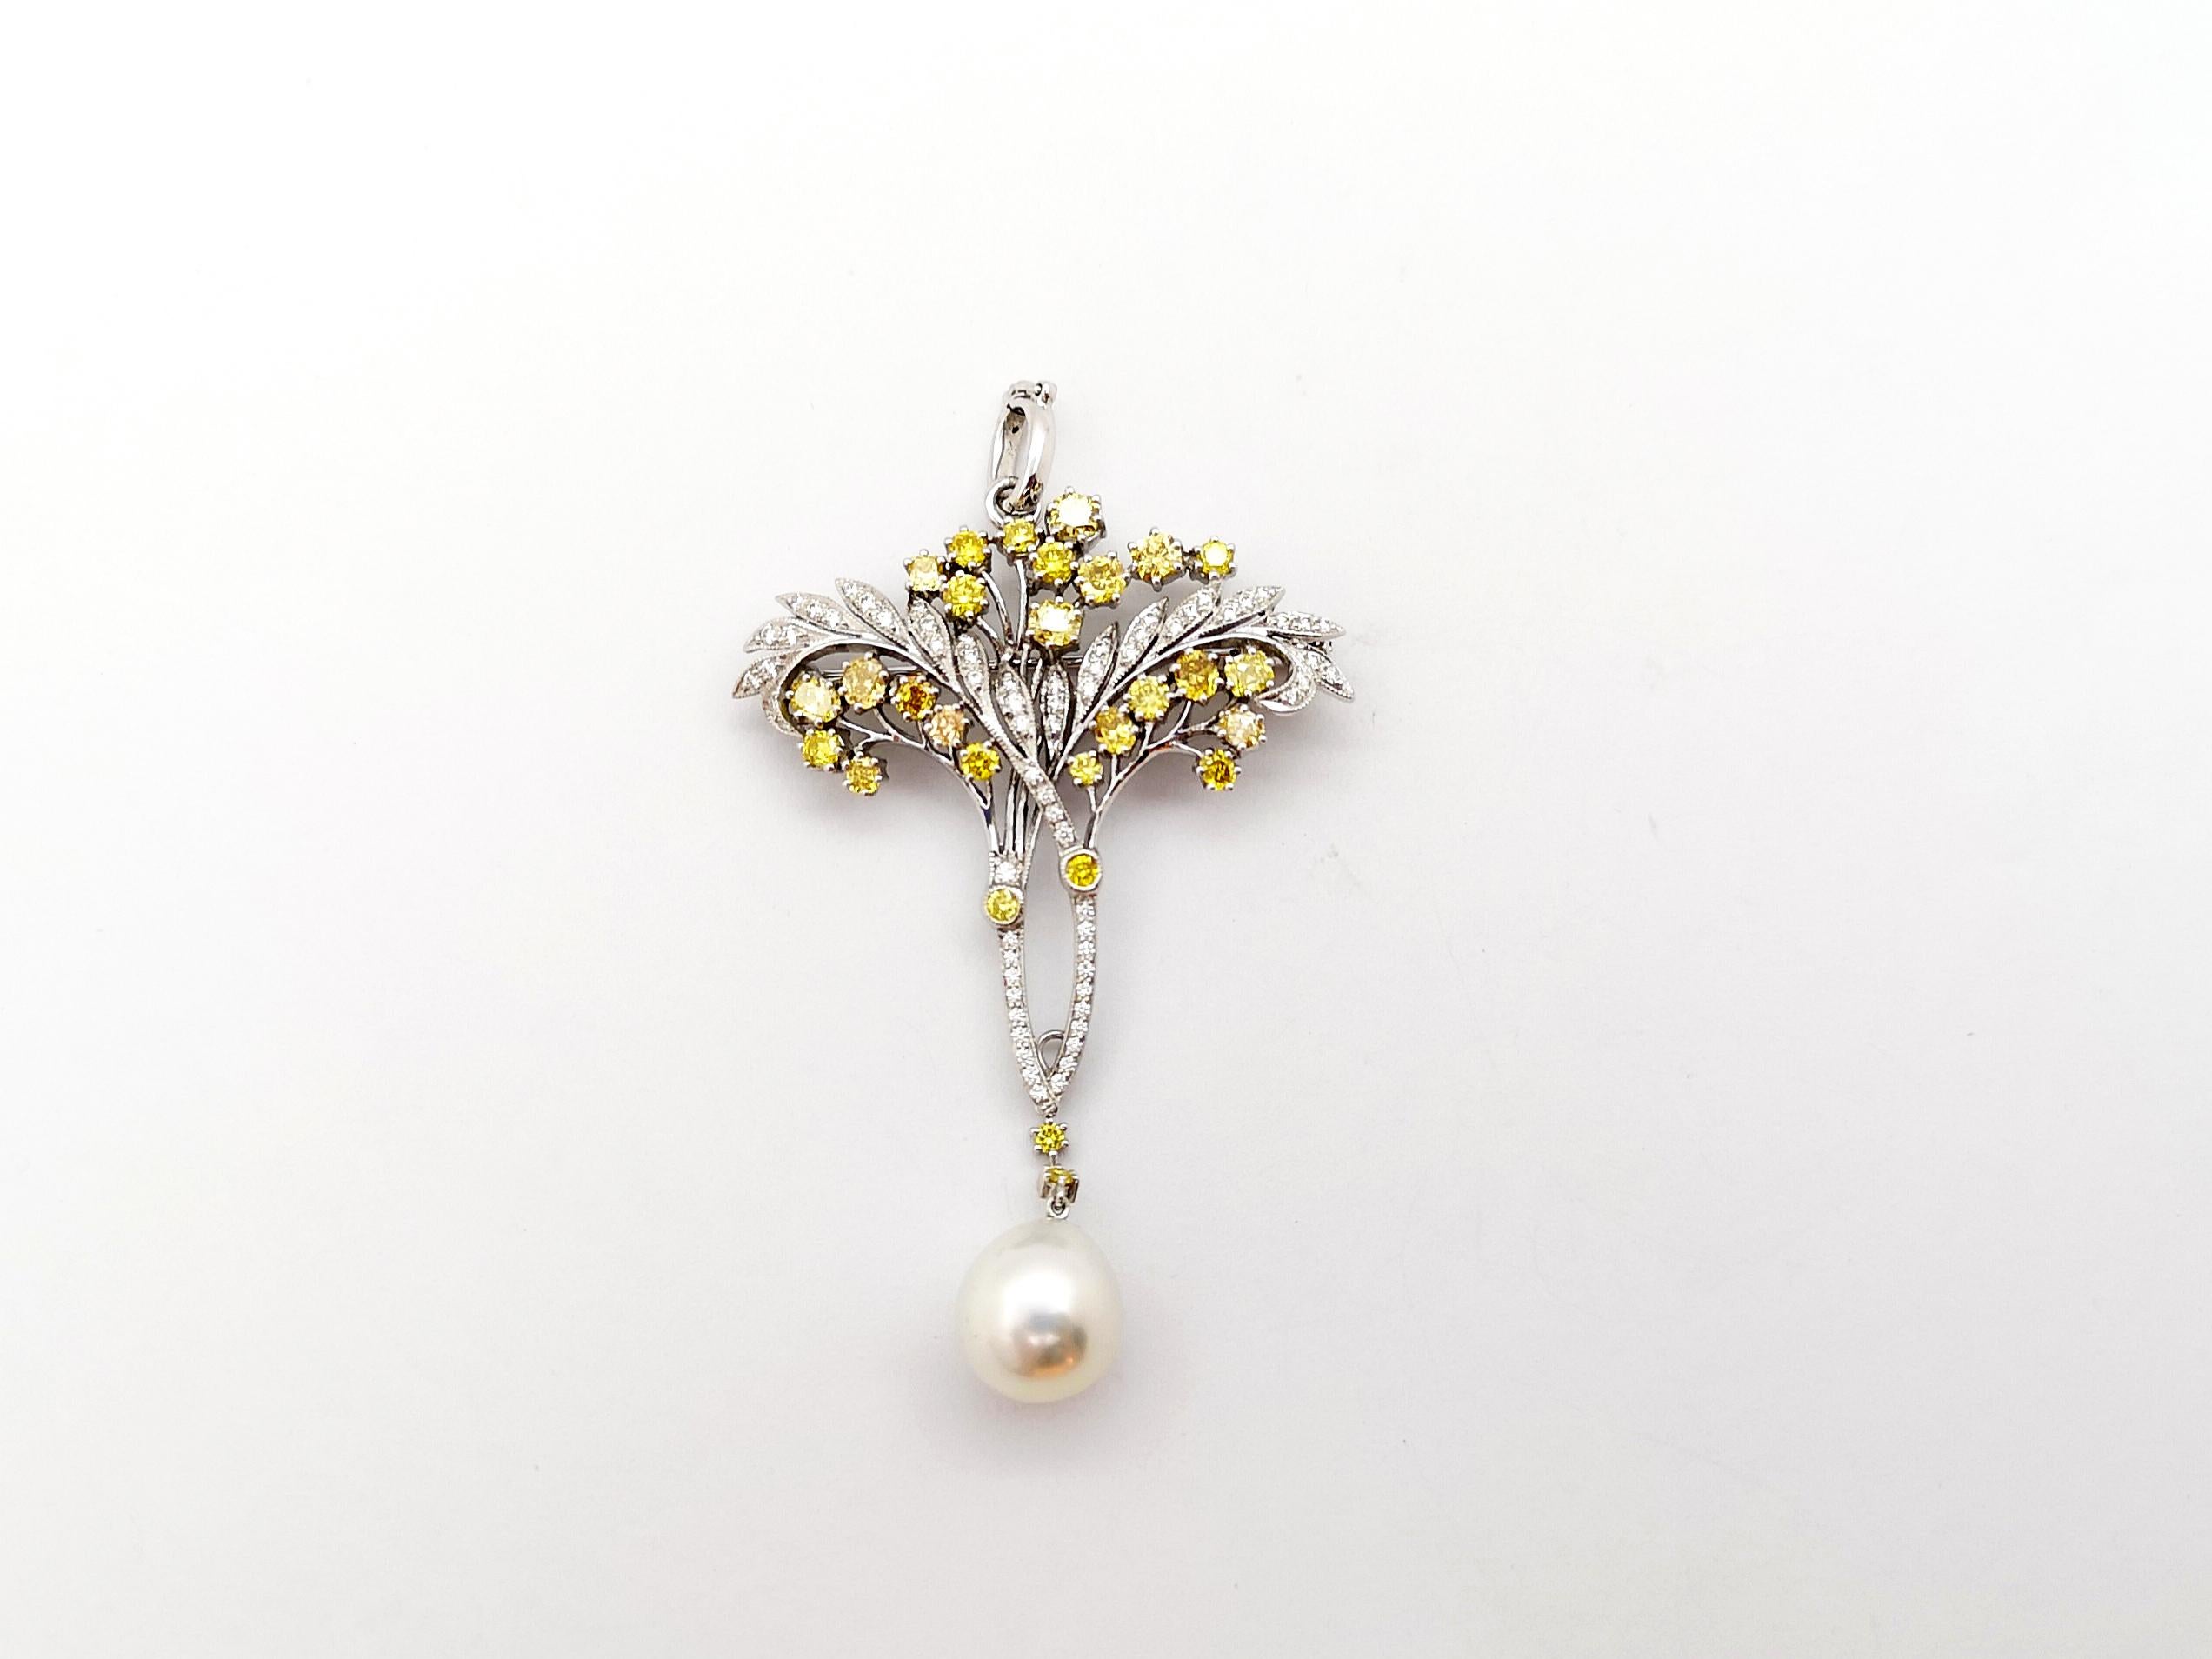 South Sea Pearl, Yellow Diamond and Diamond Brooch/Pendant set in 18K White Gold For Sale 1